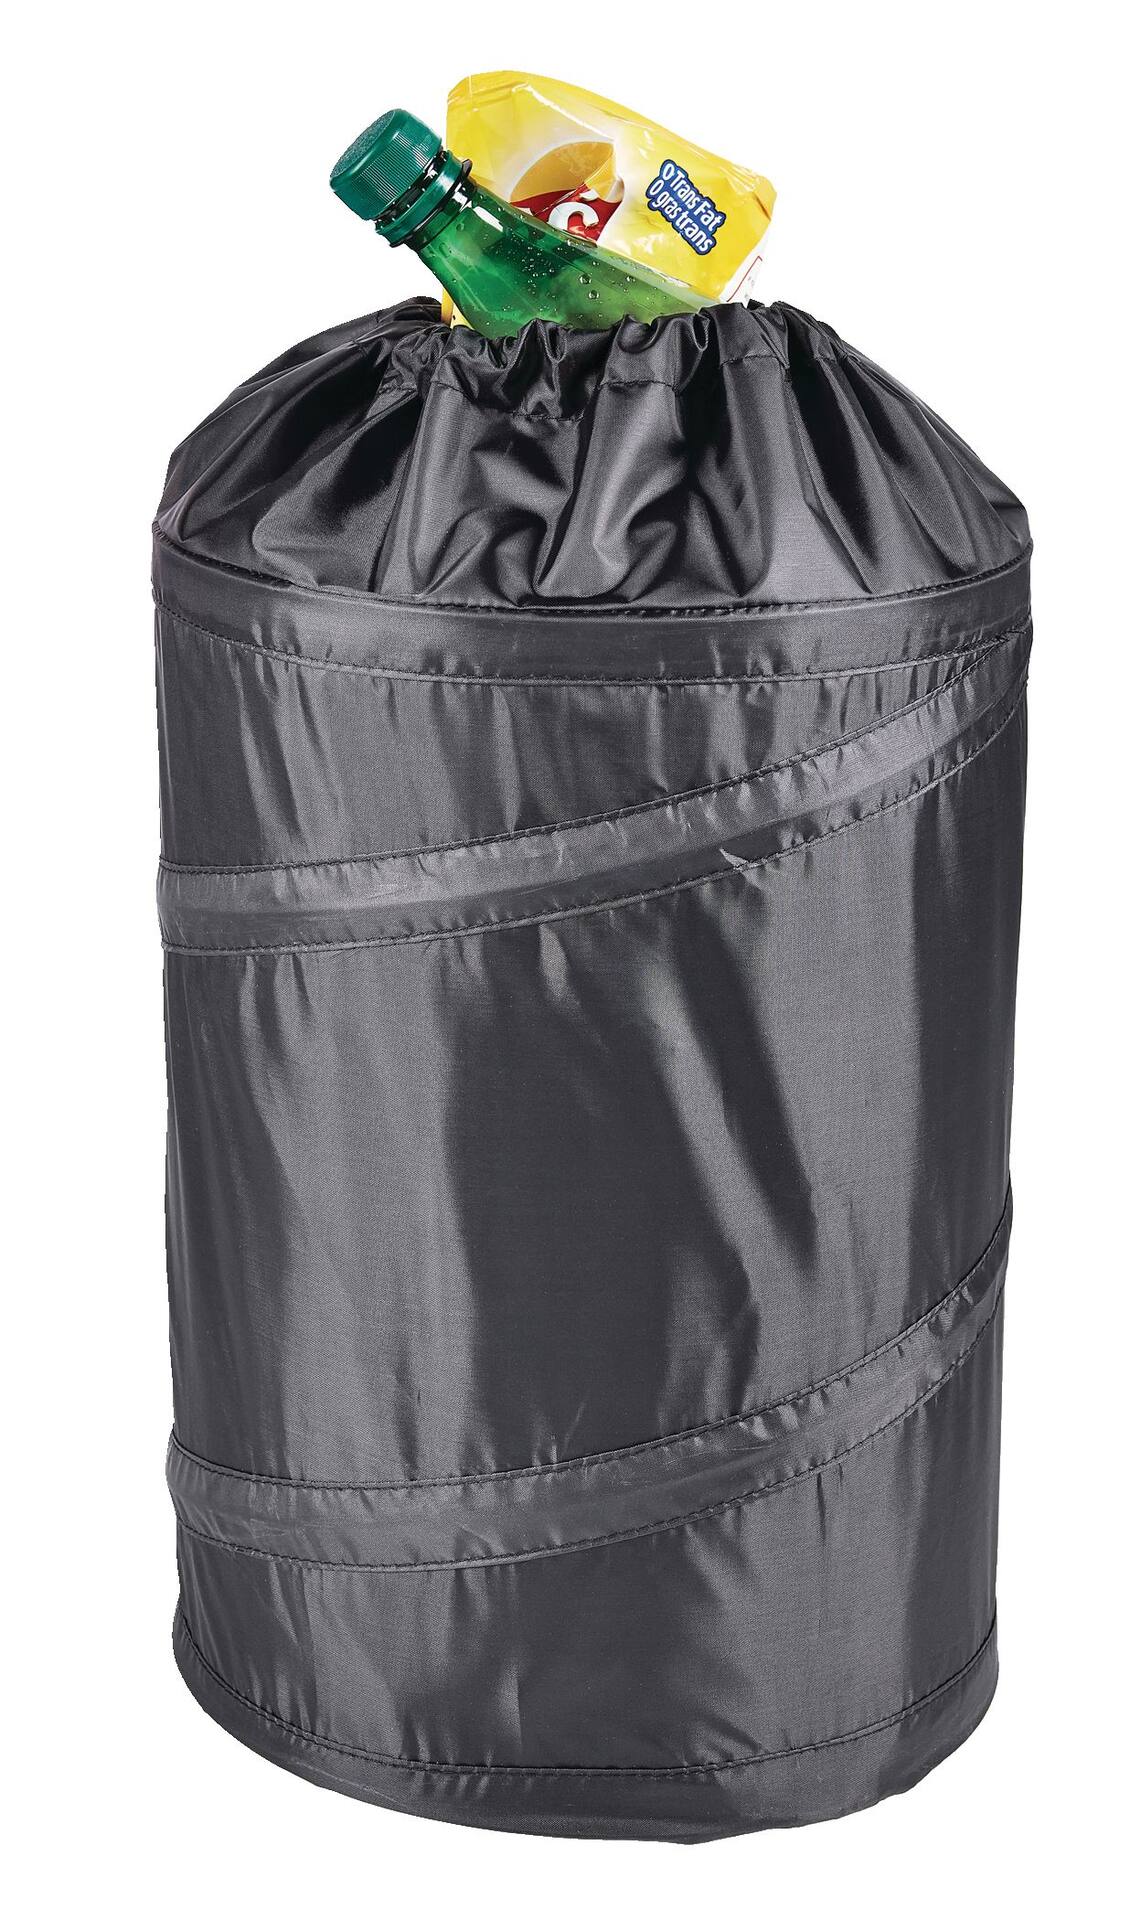 Collapsible Auto Trash Can | Canadian Tire